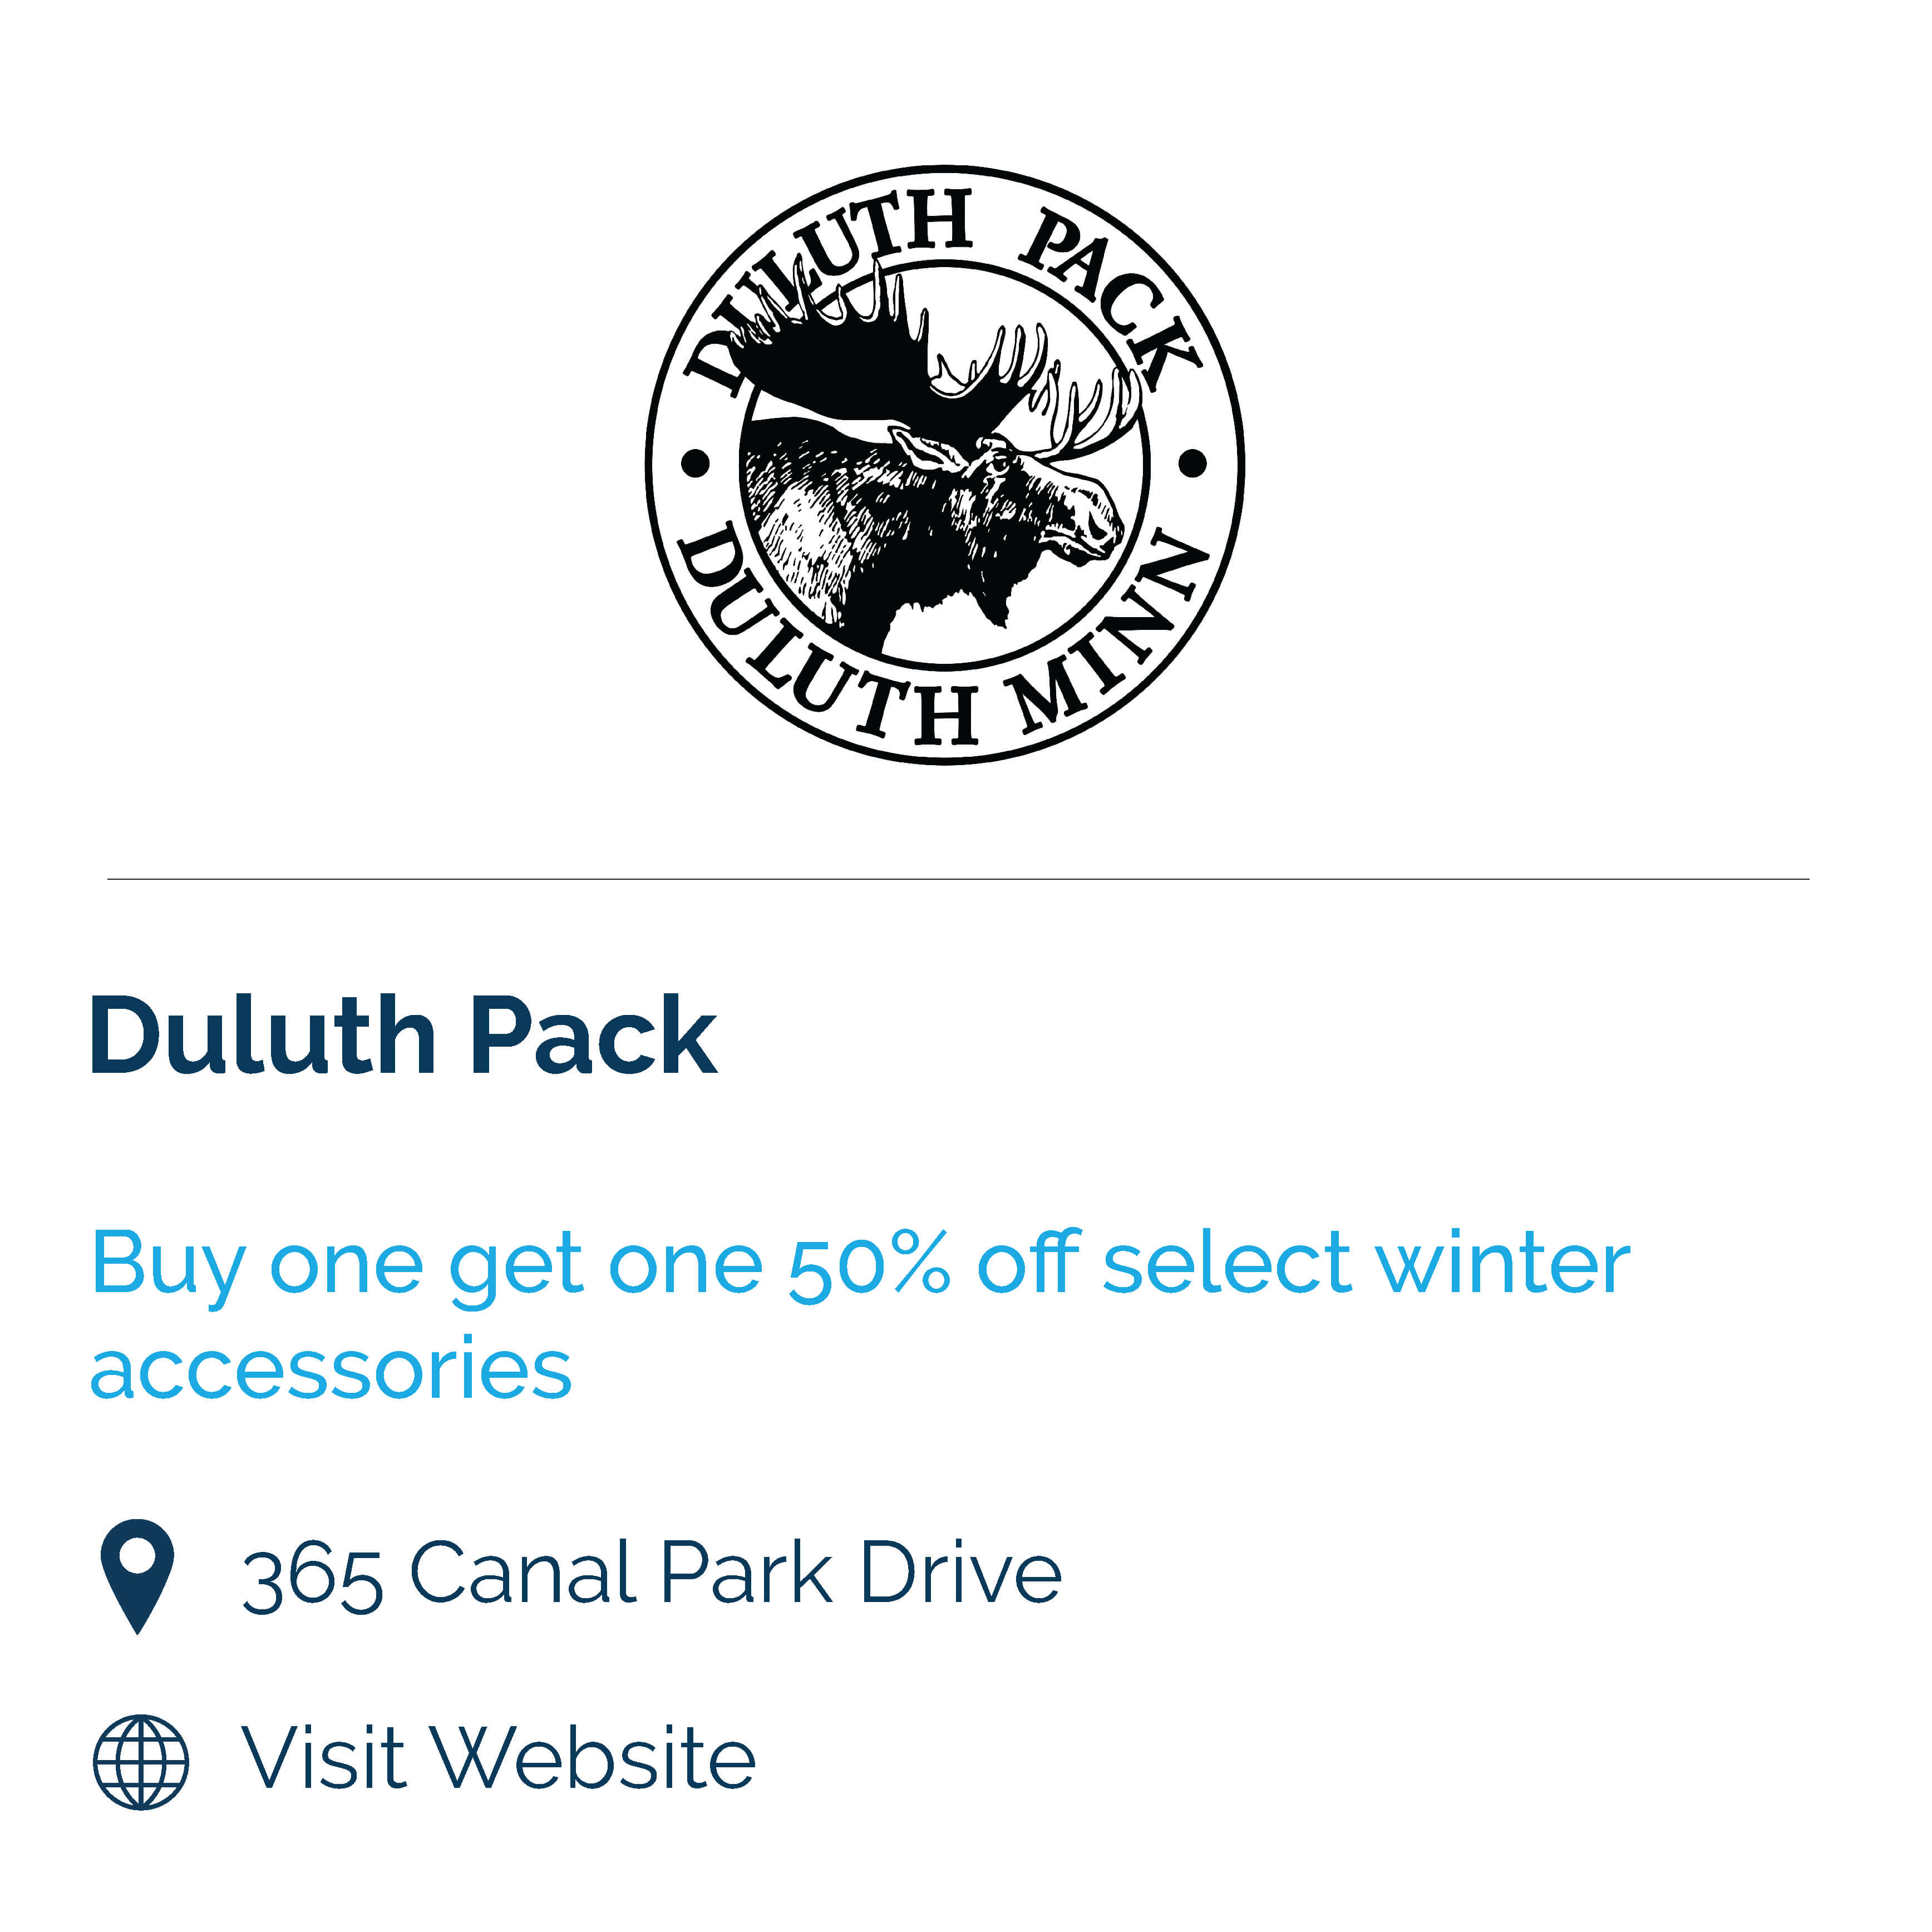 duluth pack. buy one get one 50% off select winter accessories. 365 canal park drive